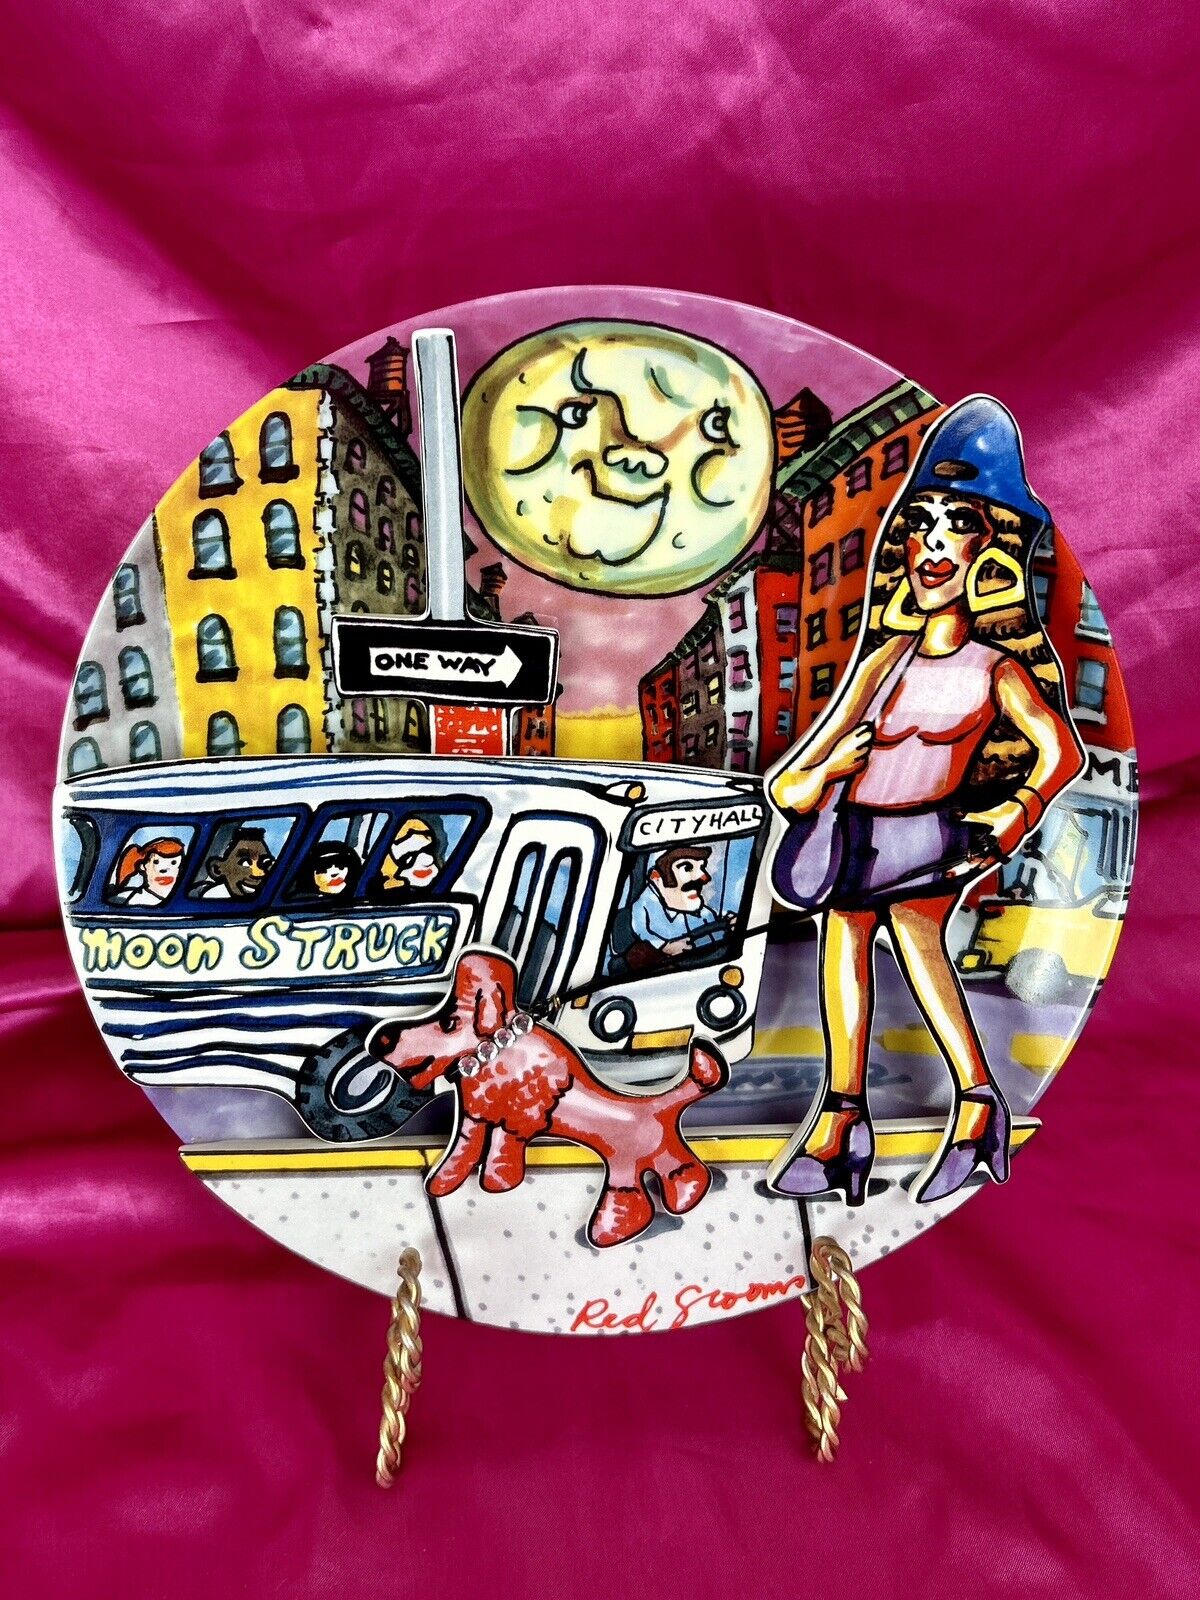 RED GROOMS Pop Art Plate Moonstruck New York City Hand Painted Sculpture LE 2500